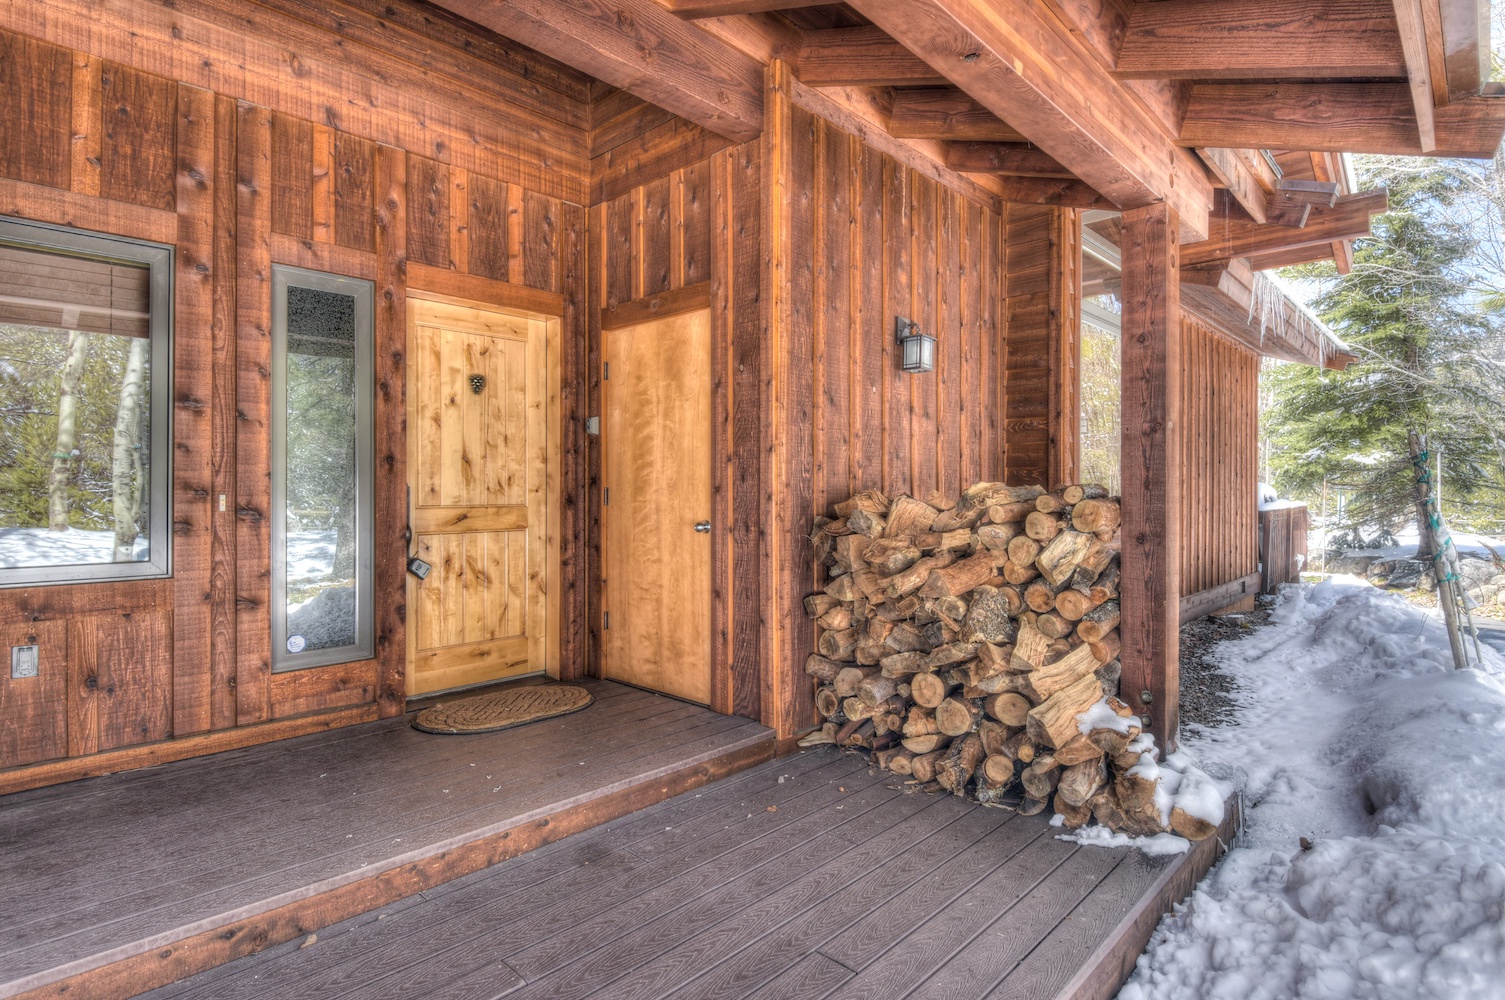 Covered entryway with firewood